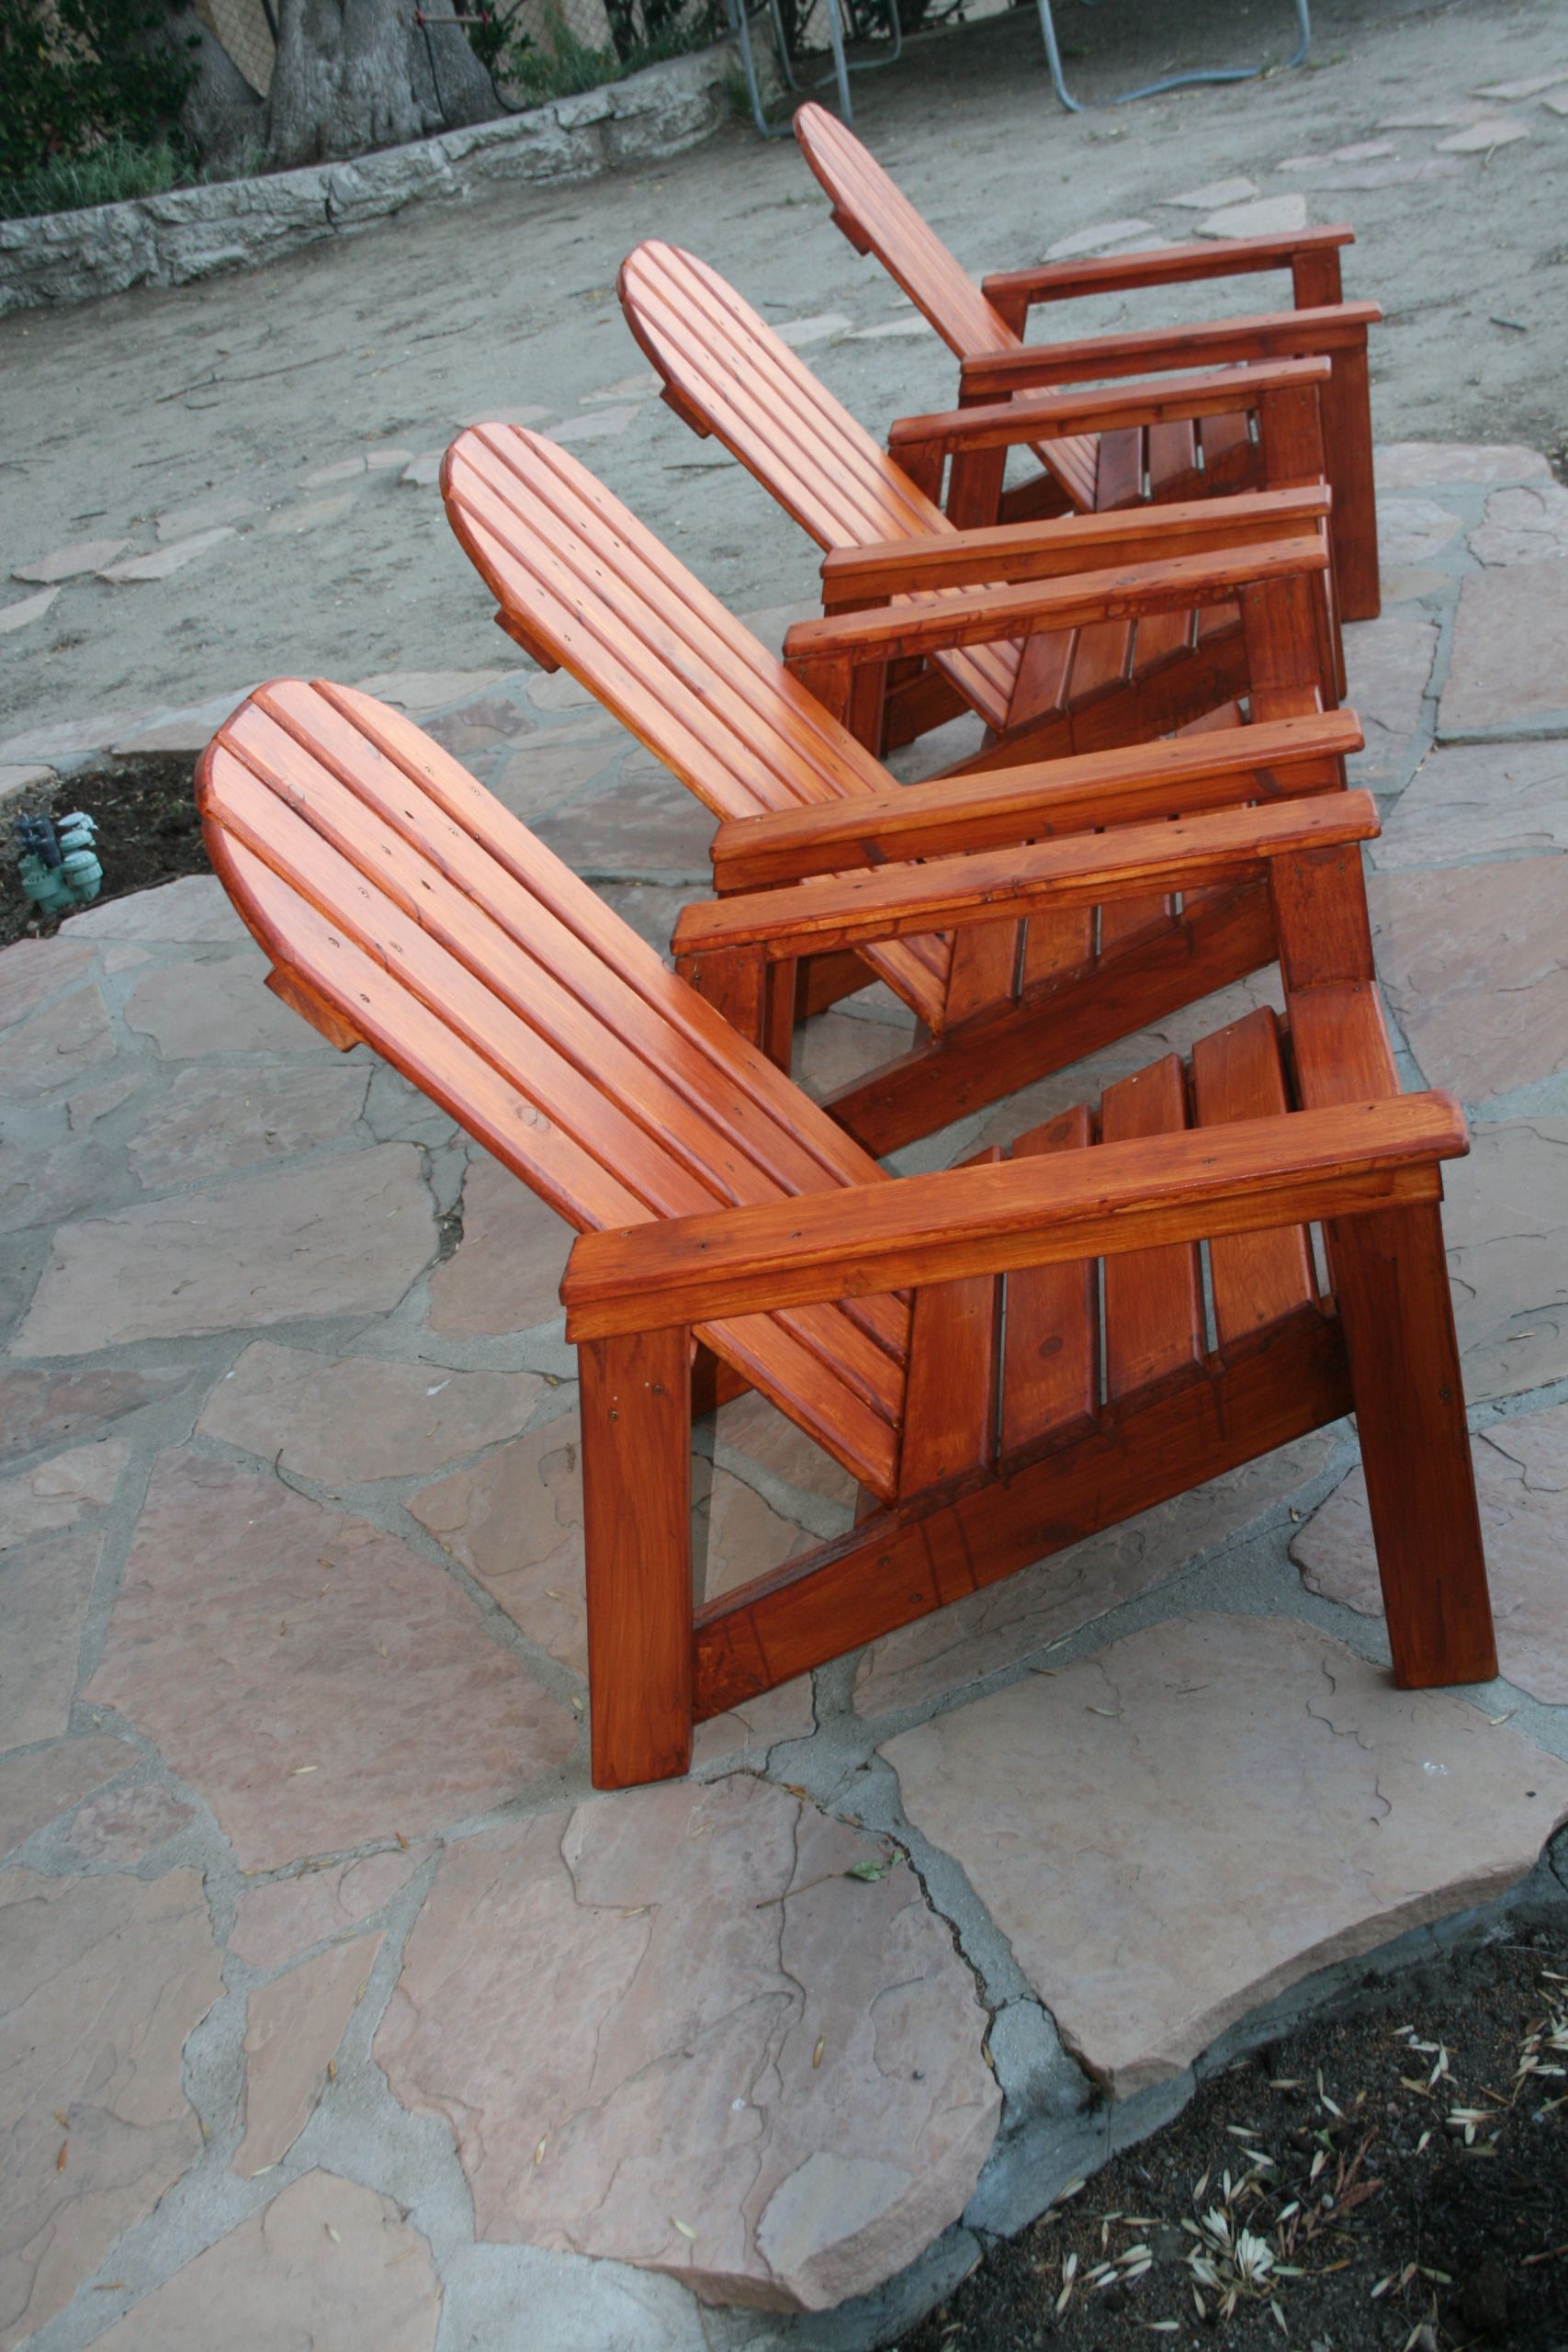 The 23 Best Ideas for Diy Adirondack Chair Kit - Home 